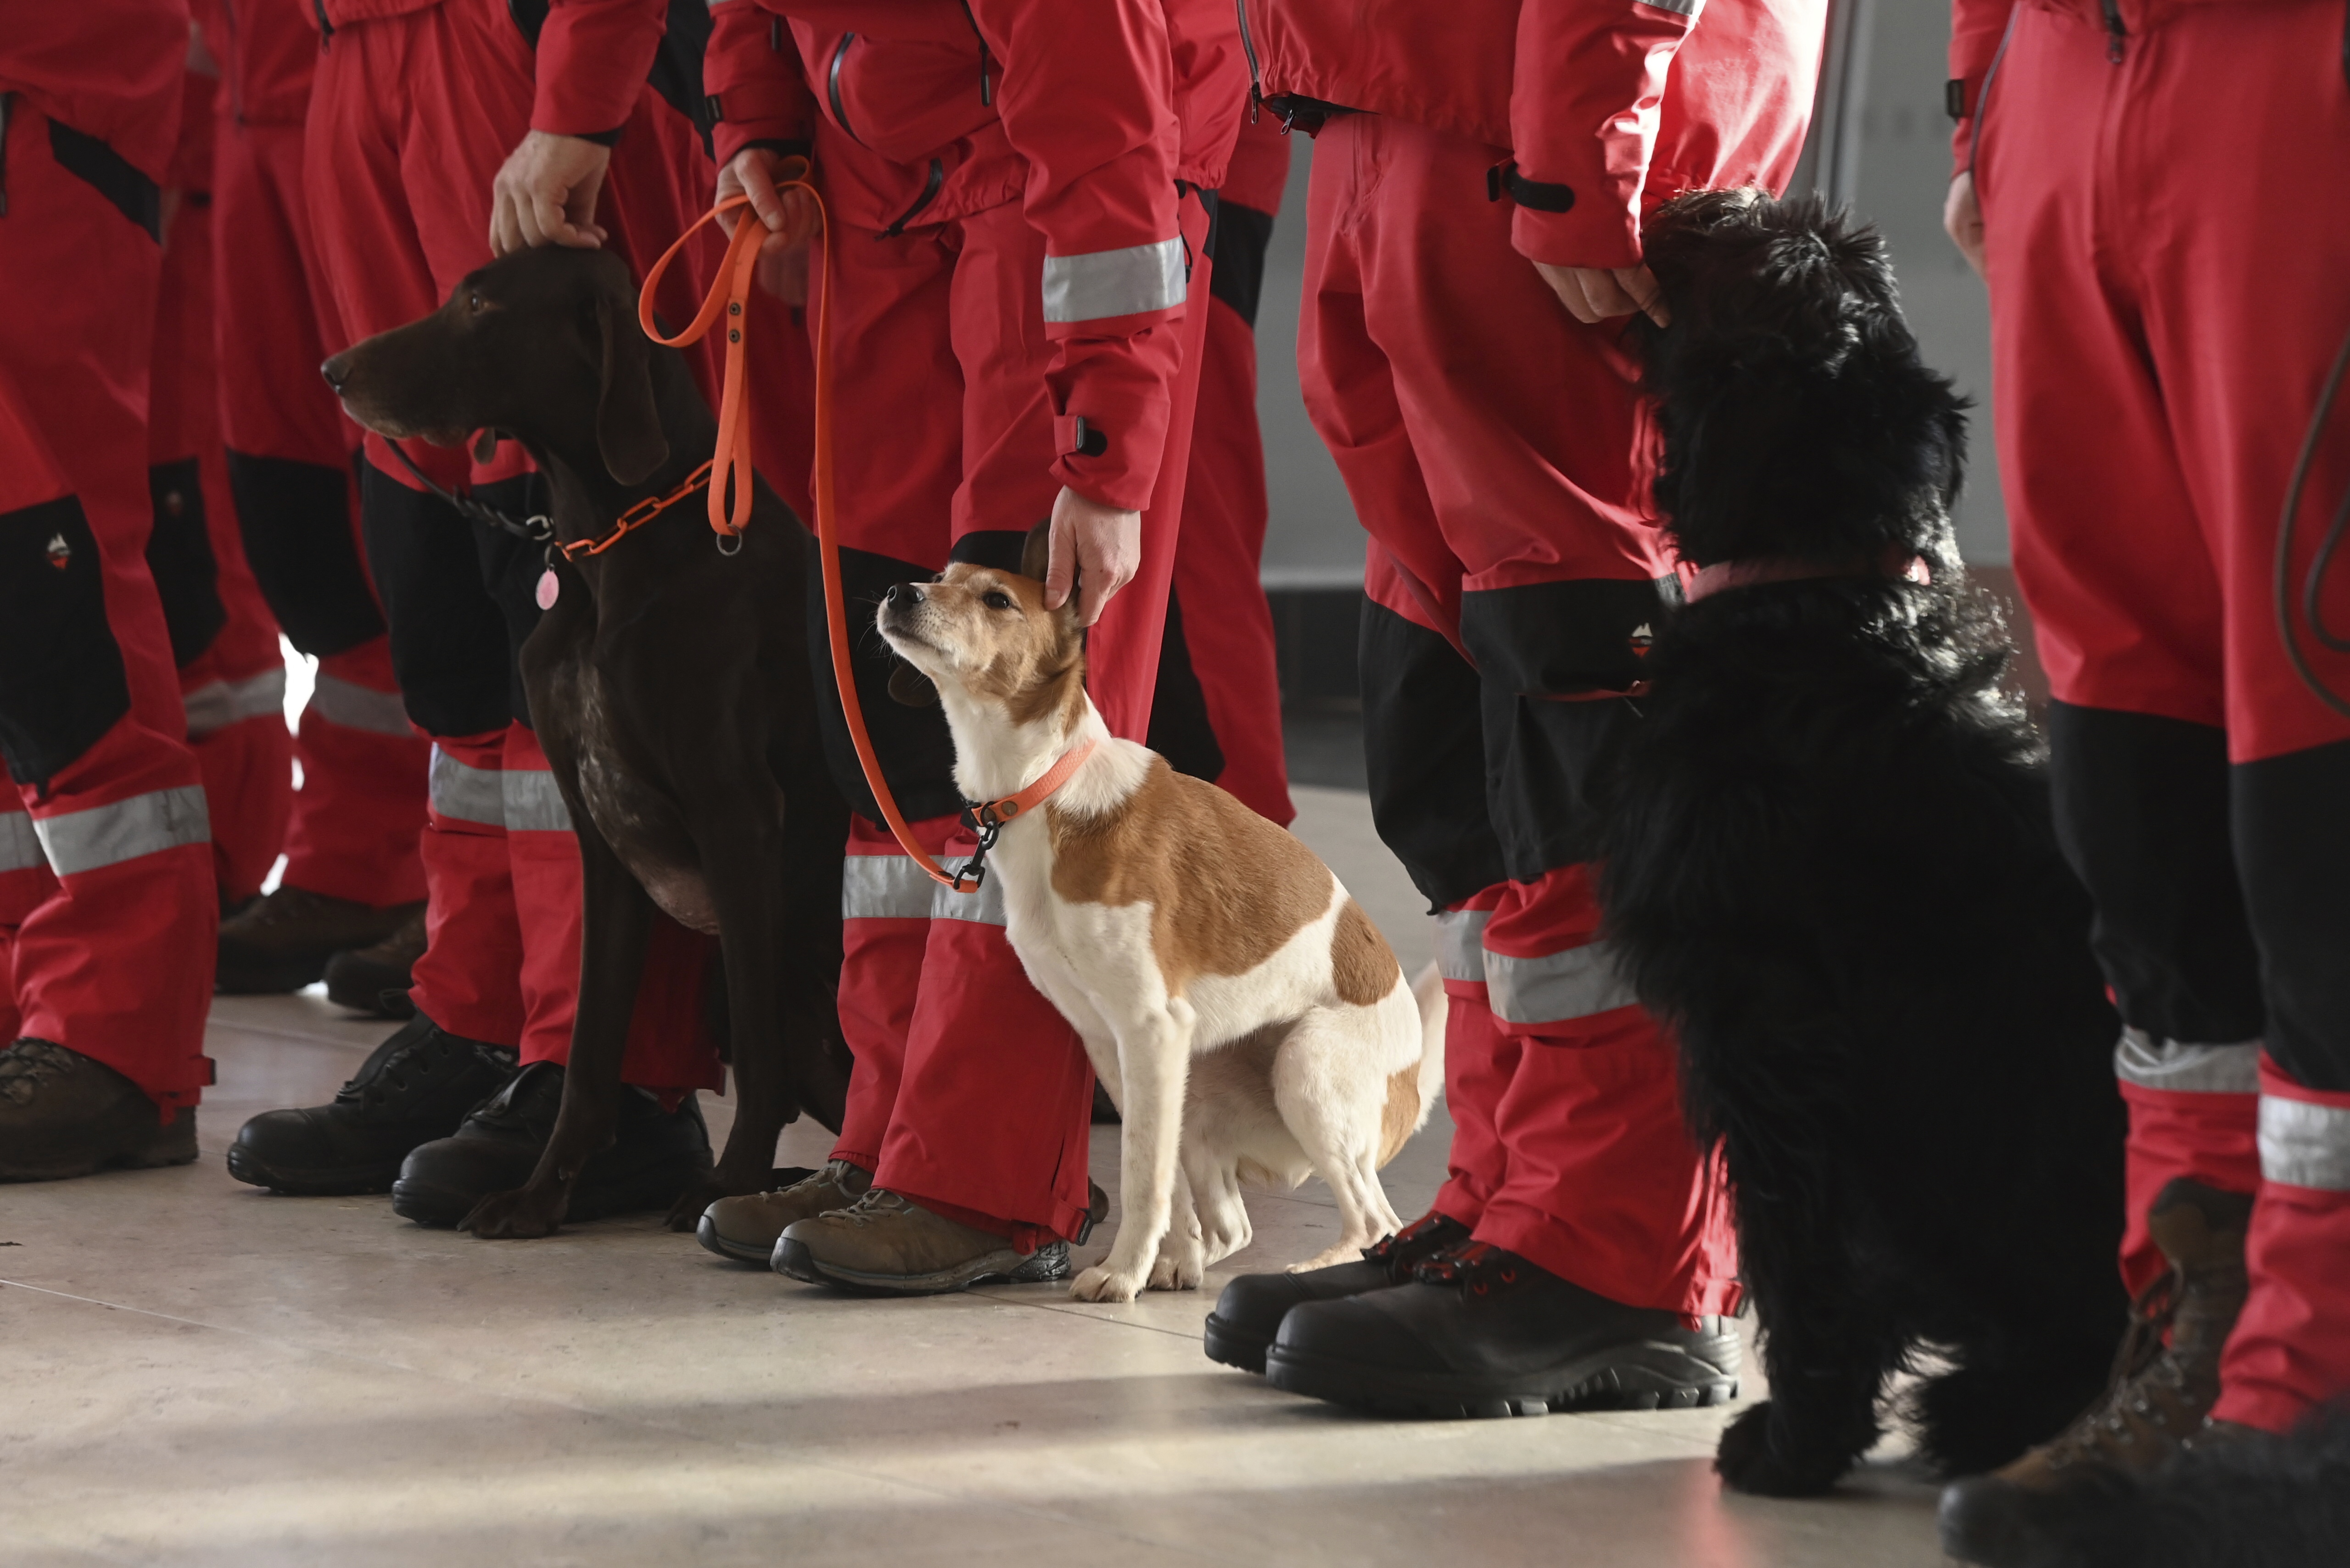 Members of urban search and rescue (USAR) team of Czech firefighters prepares to fly to the earthquake-hit Turkey to help search for people in debris, at Leos Janacek Airport, in Ostrava, Czech Republic, Monday, Feb. 6, 2023.